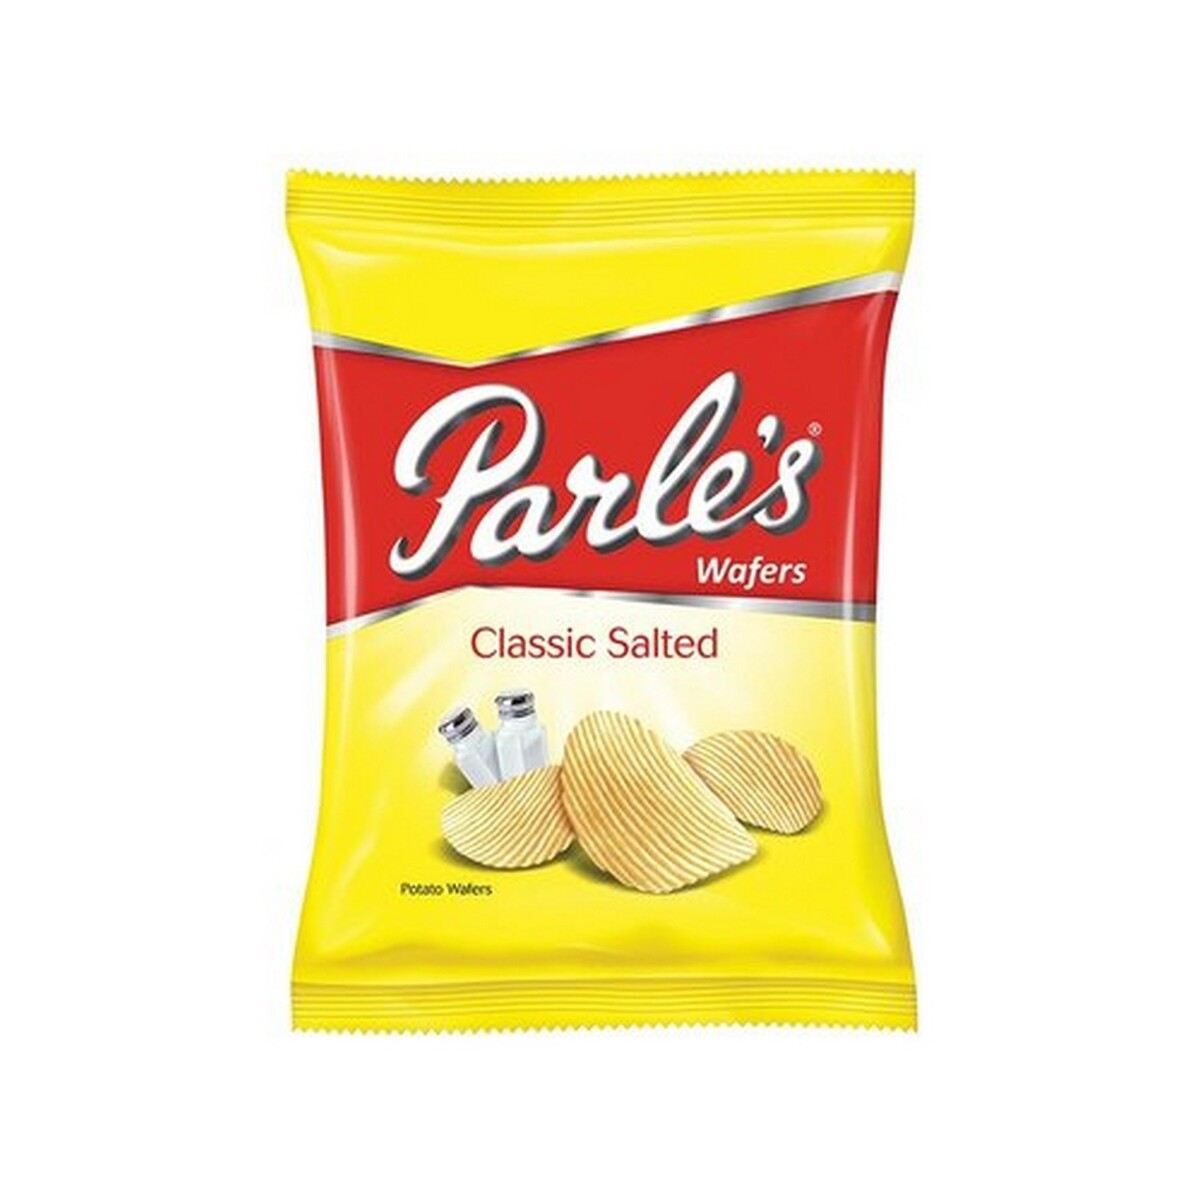 Parle Wafers Classic Salted 60gm